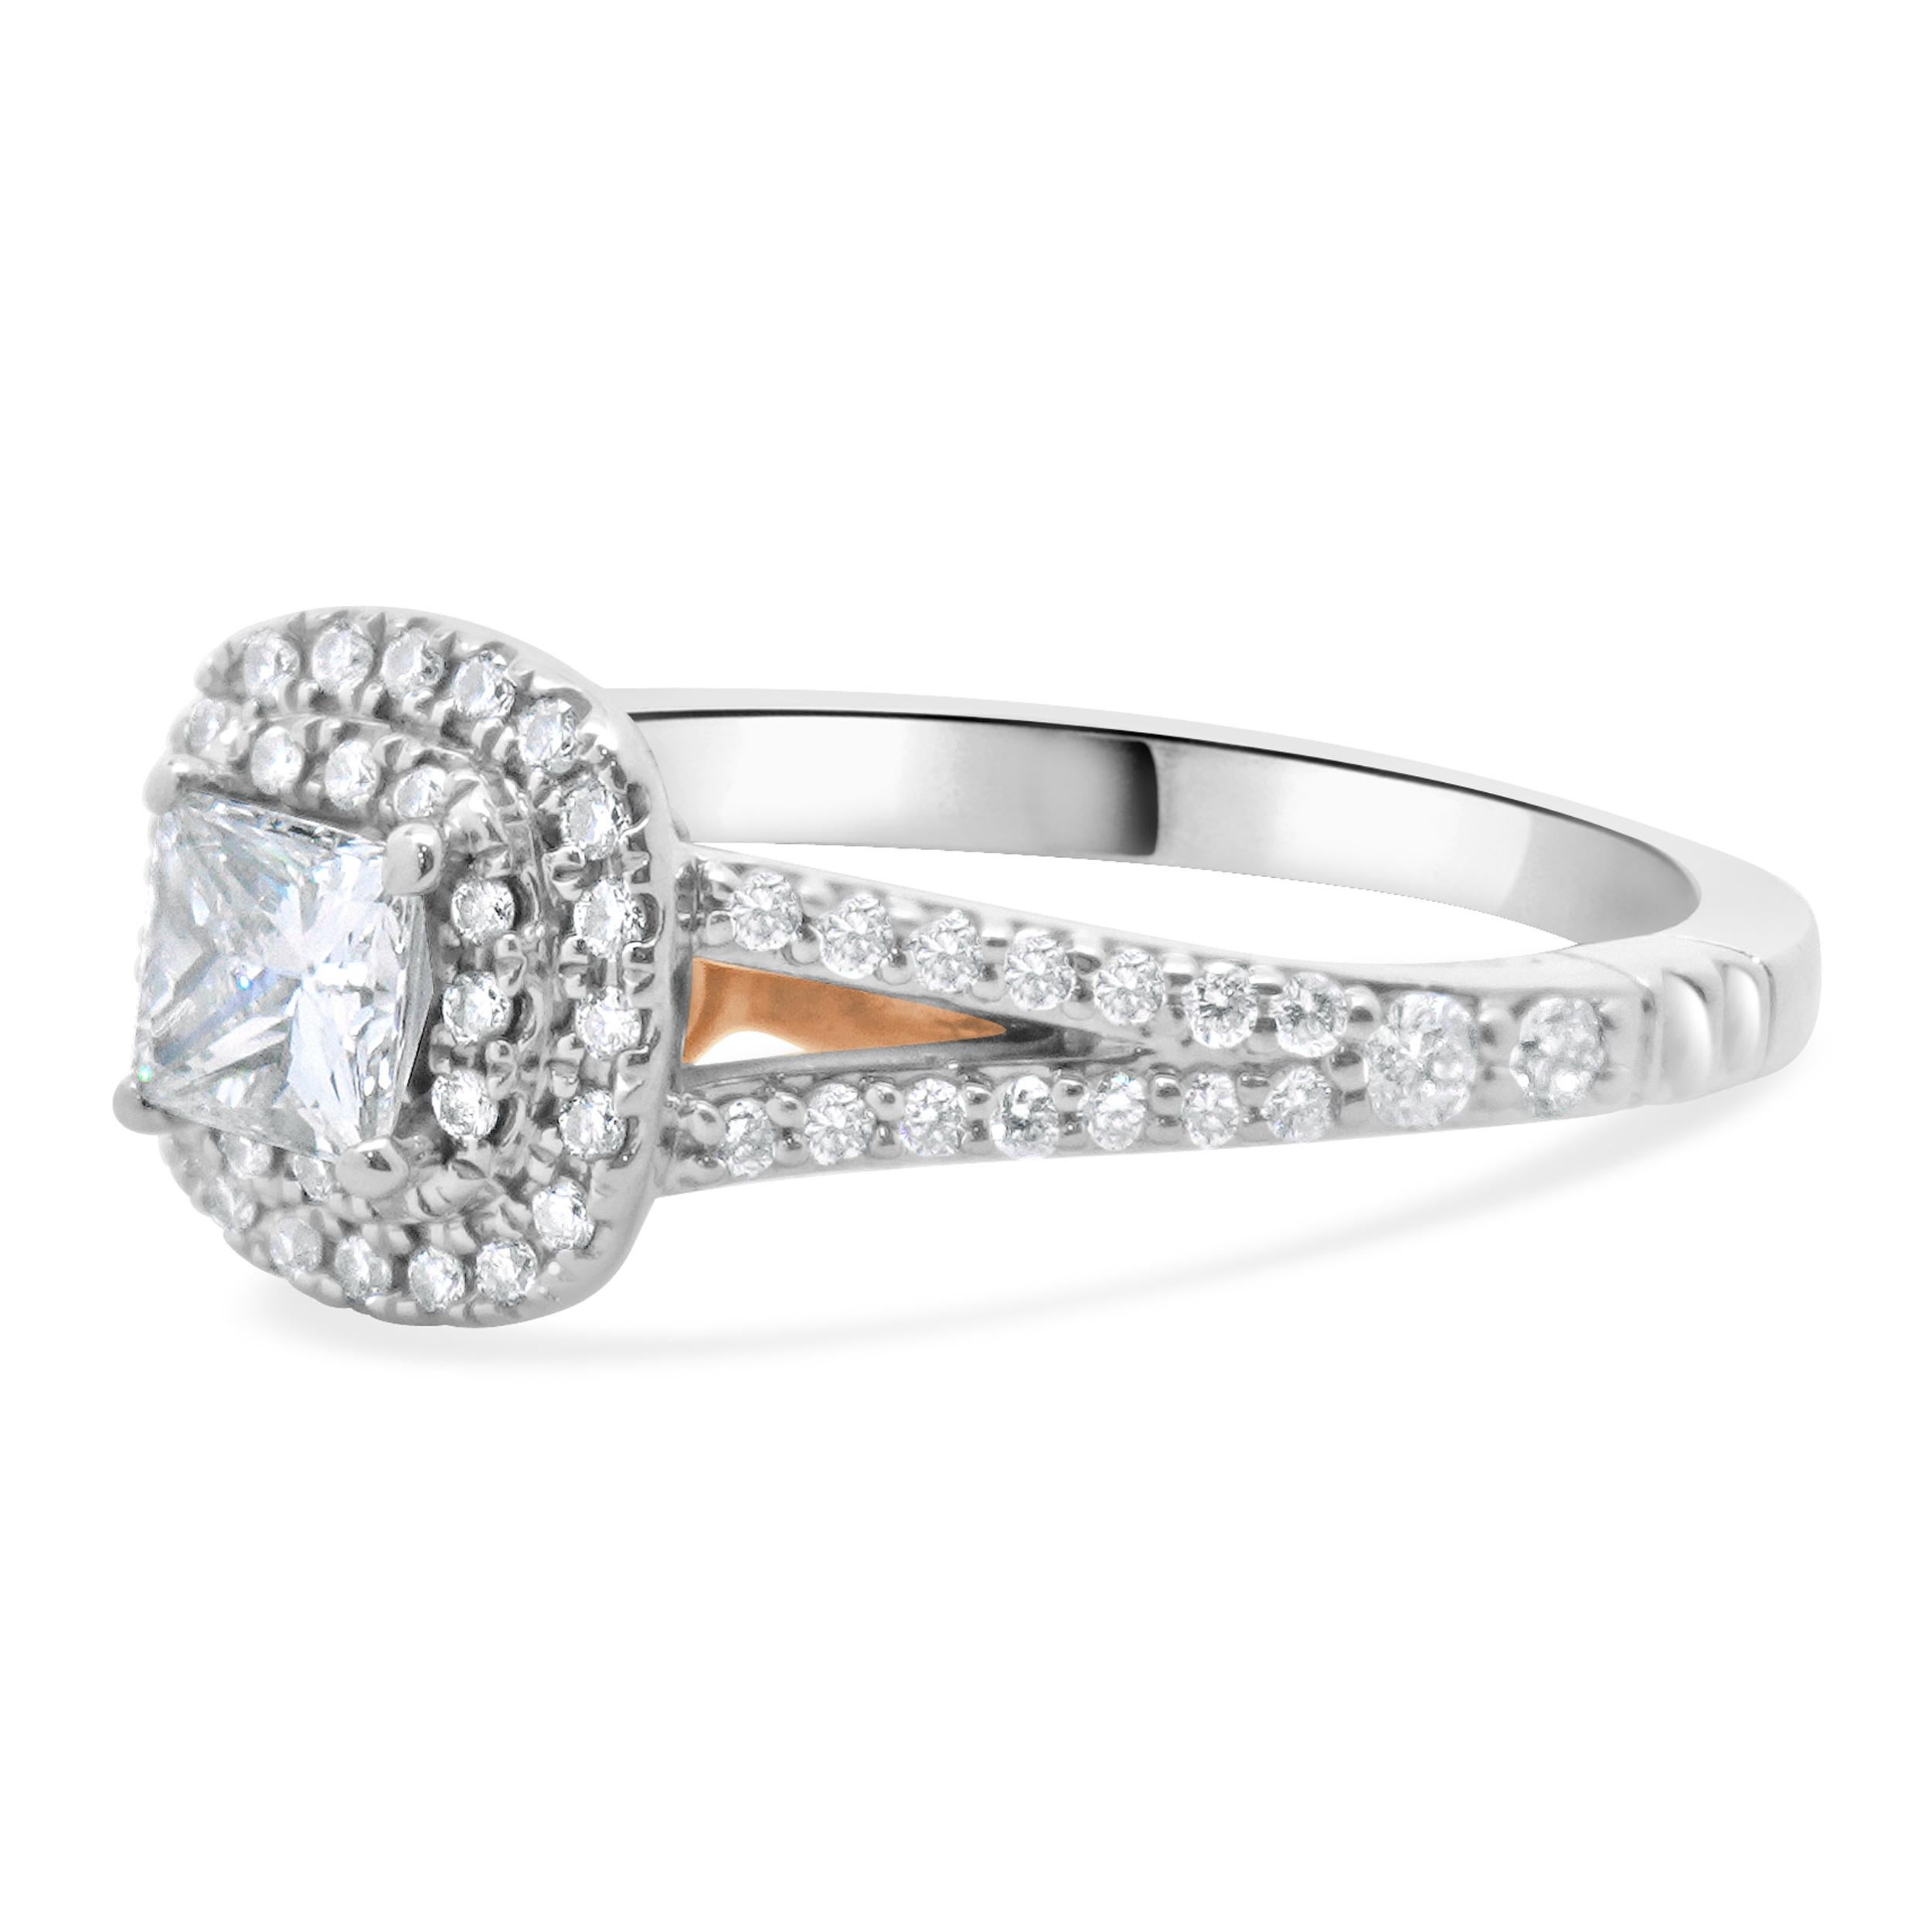 Designer: Disney
Material: 14K white gold
Diamond: 1 round brilliant cut = 0.45ct
Color: H
Clarity: I1
Diamond: 32 round brilliant cut = 0.15cttw
Color: H
Clarity: SI2
Dimensions: ring top measures 9mm wide
Ring Size: 5.75 (complimentary sizing